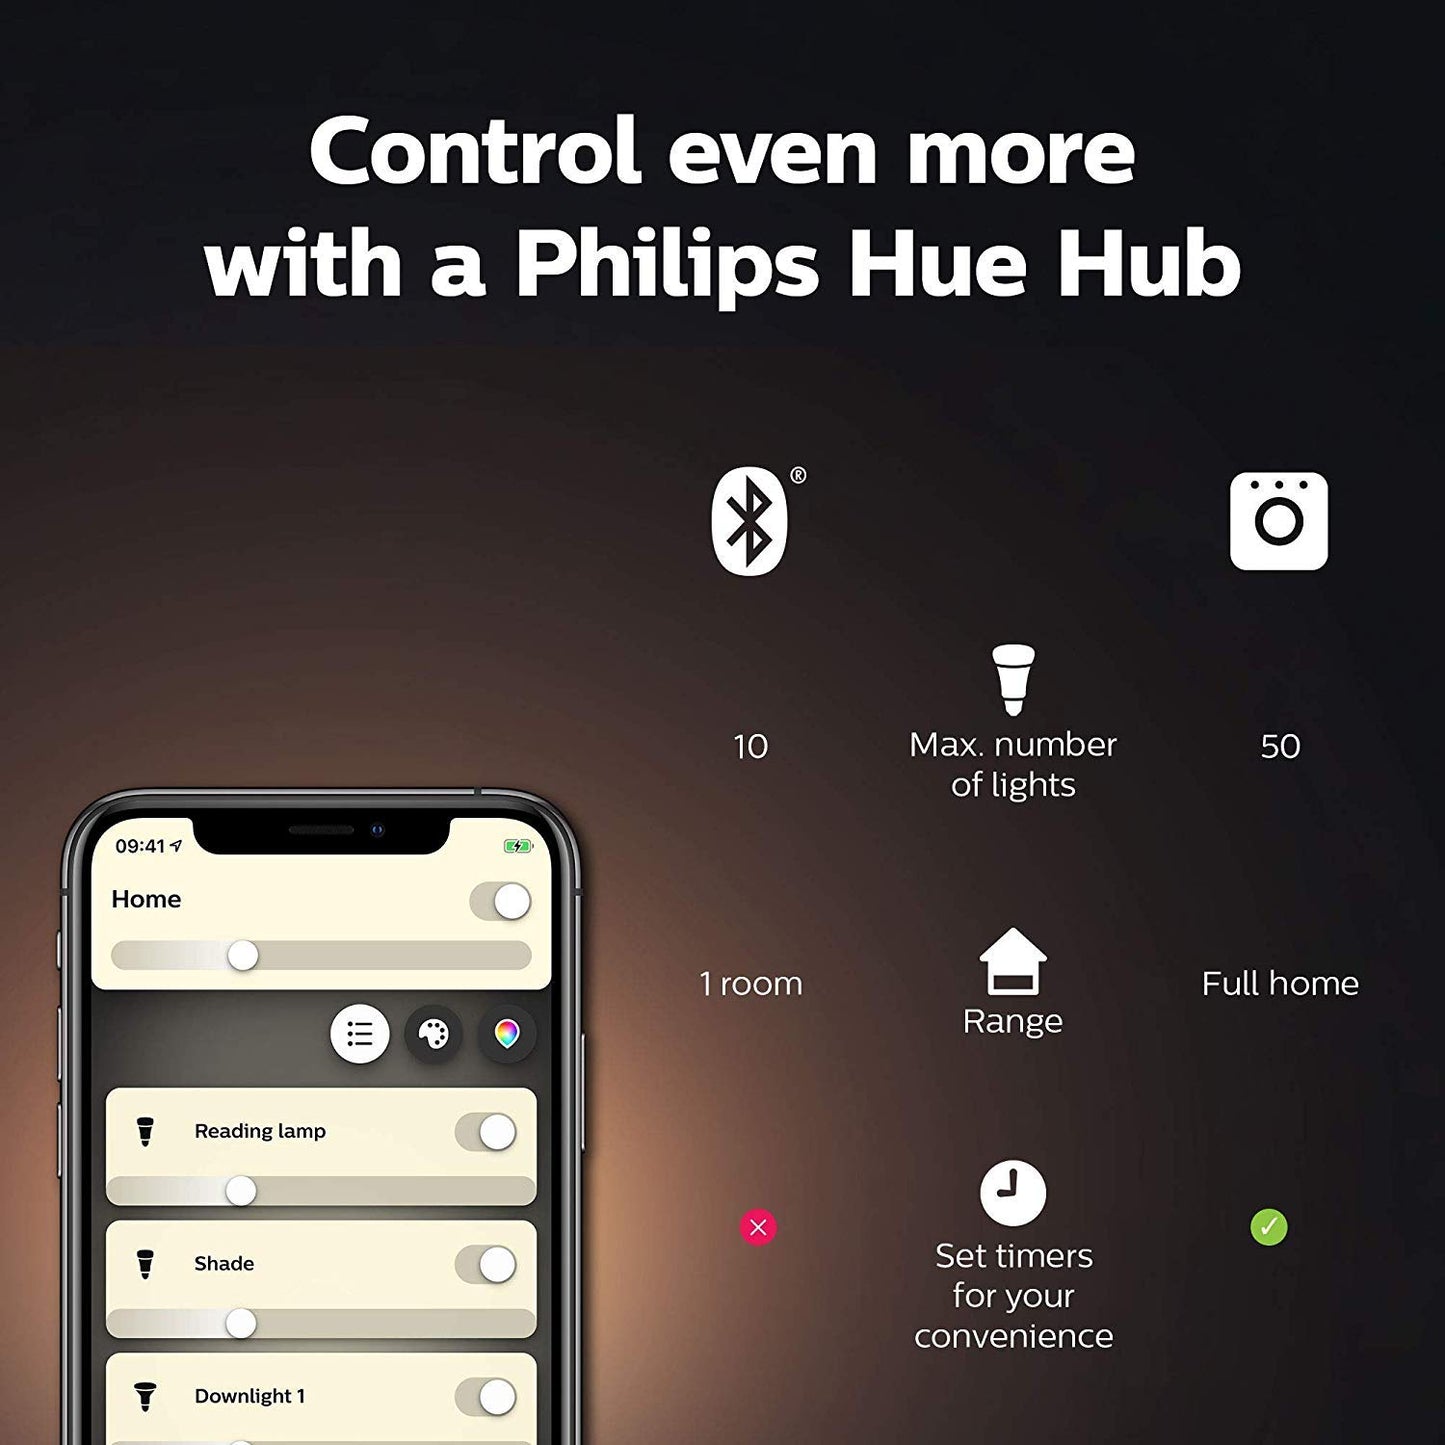 Philips Hue White Dimmable Smart Filament Candle, 2100K LED Vintage Edison Bulb, Bluetooth & Hub Compatible (Hue Hub Optional), Voice Activated with Alexa, 4-Pack, (R4563601)